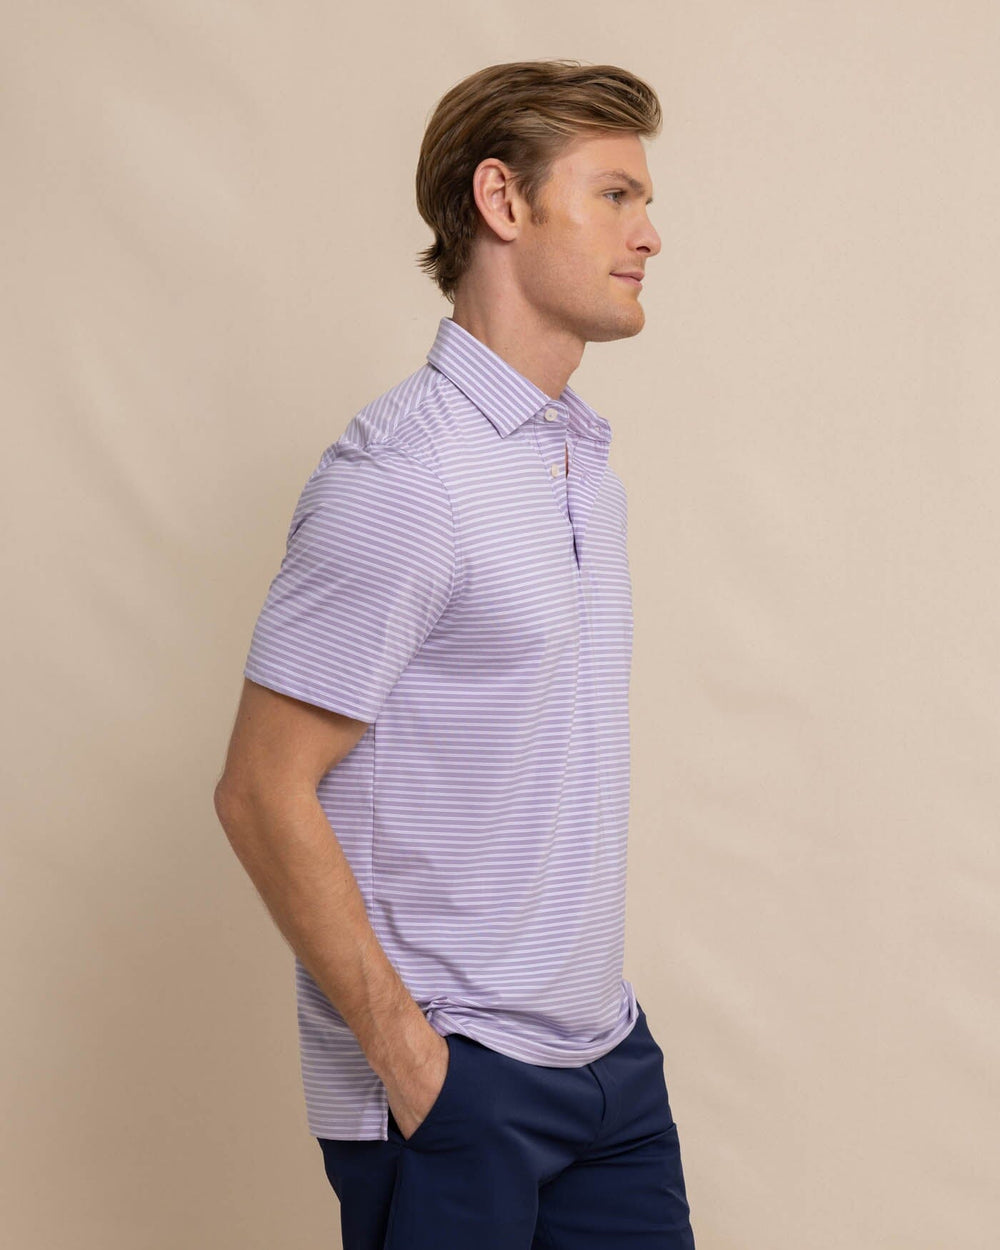 The front view of the Southern Tide brrr eeze Beattie Stripe Performance Polo by Southern Tide - Wisteria Purple